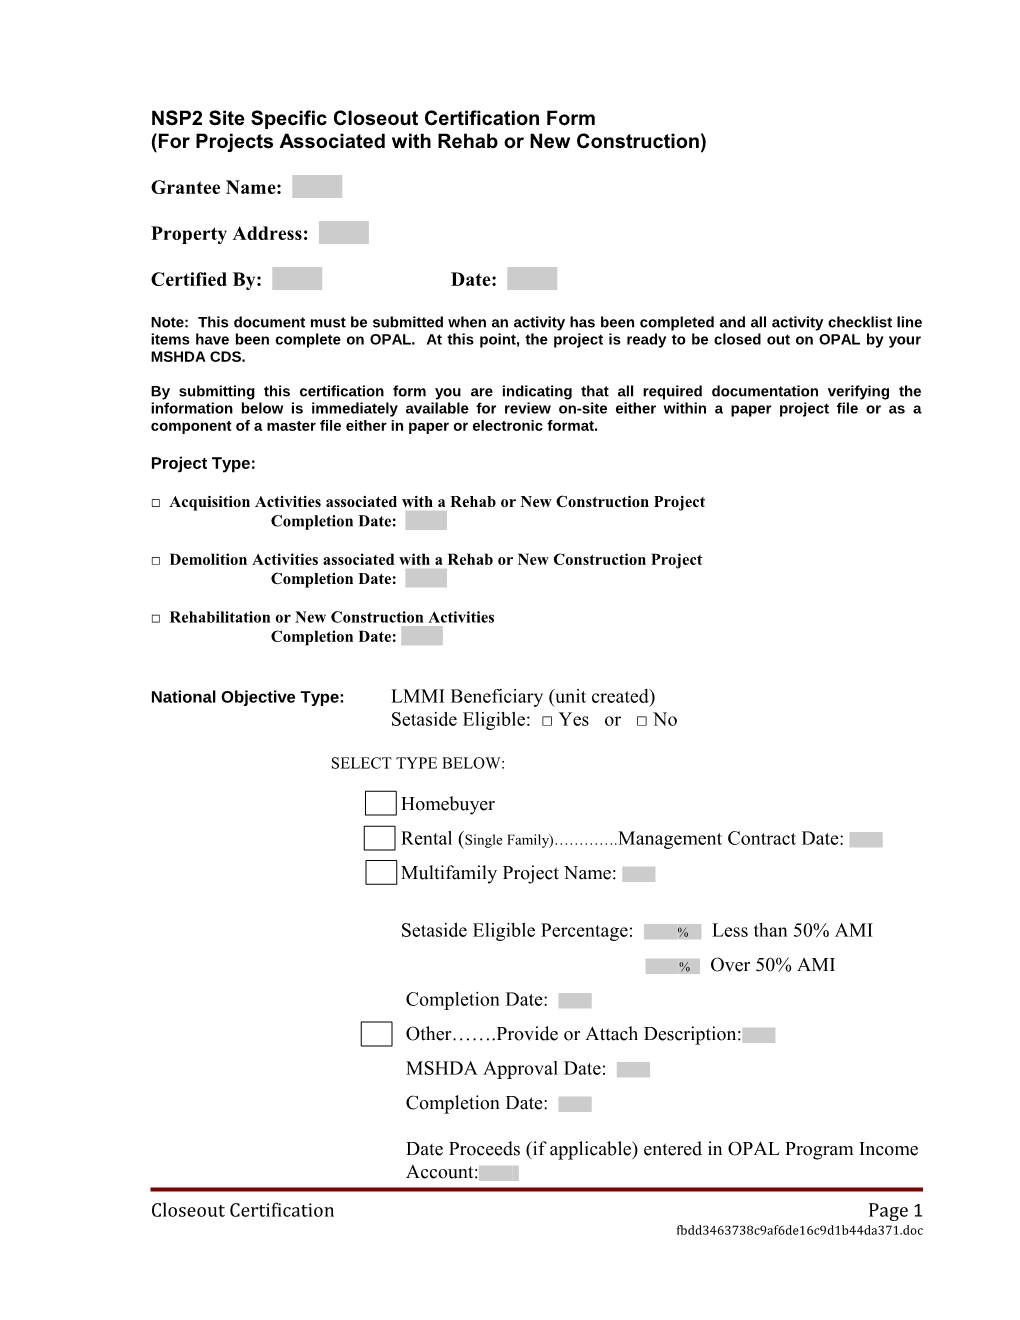 NSP2 Site Specific Closeout Certification Form